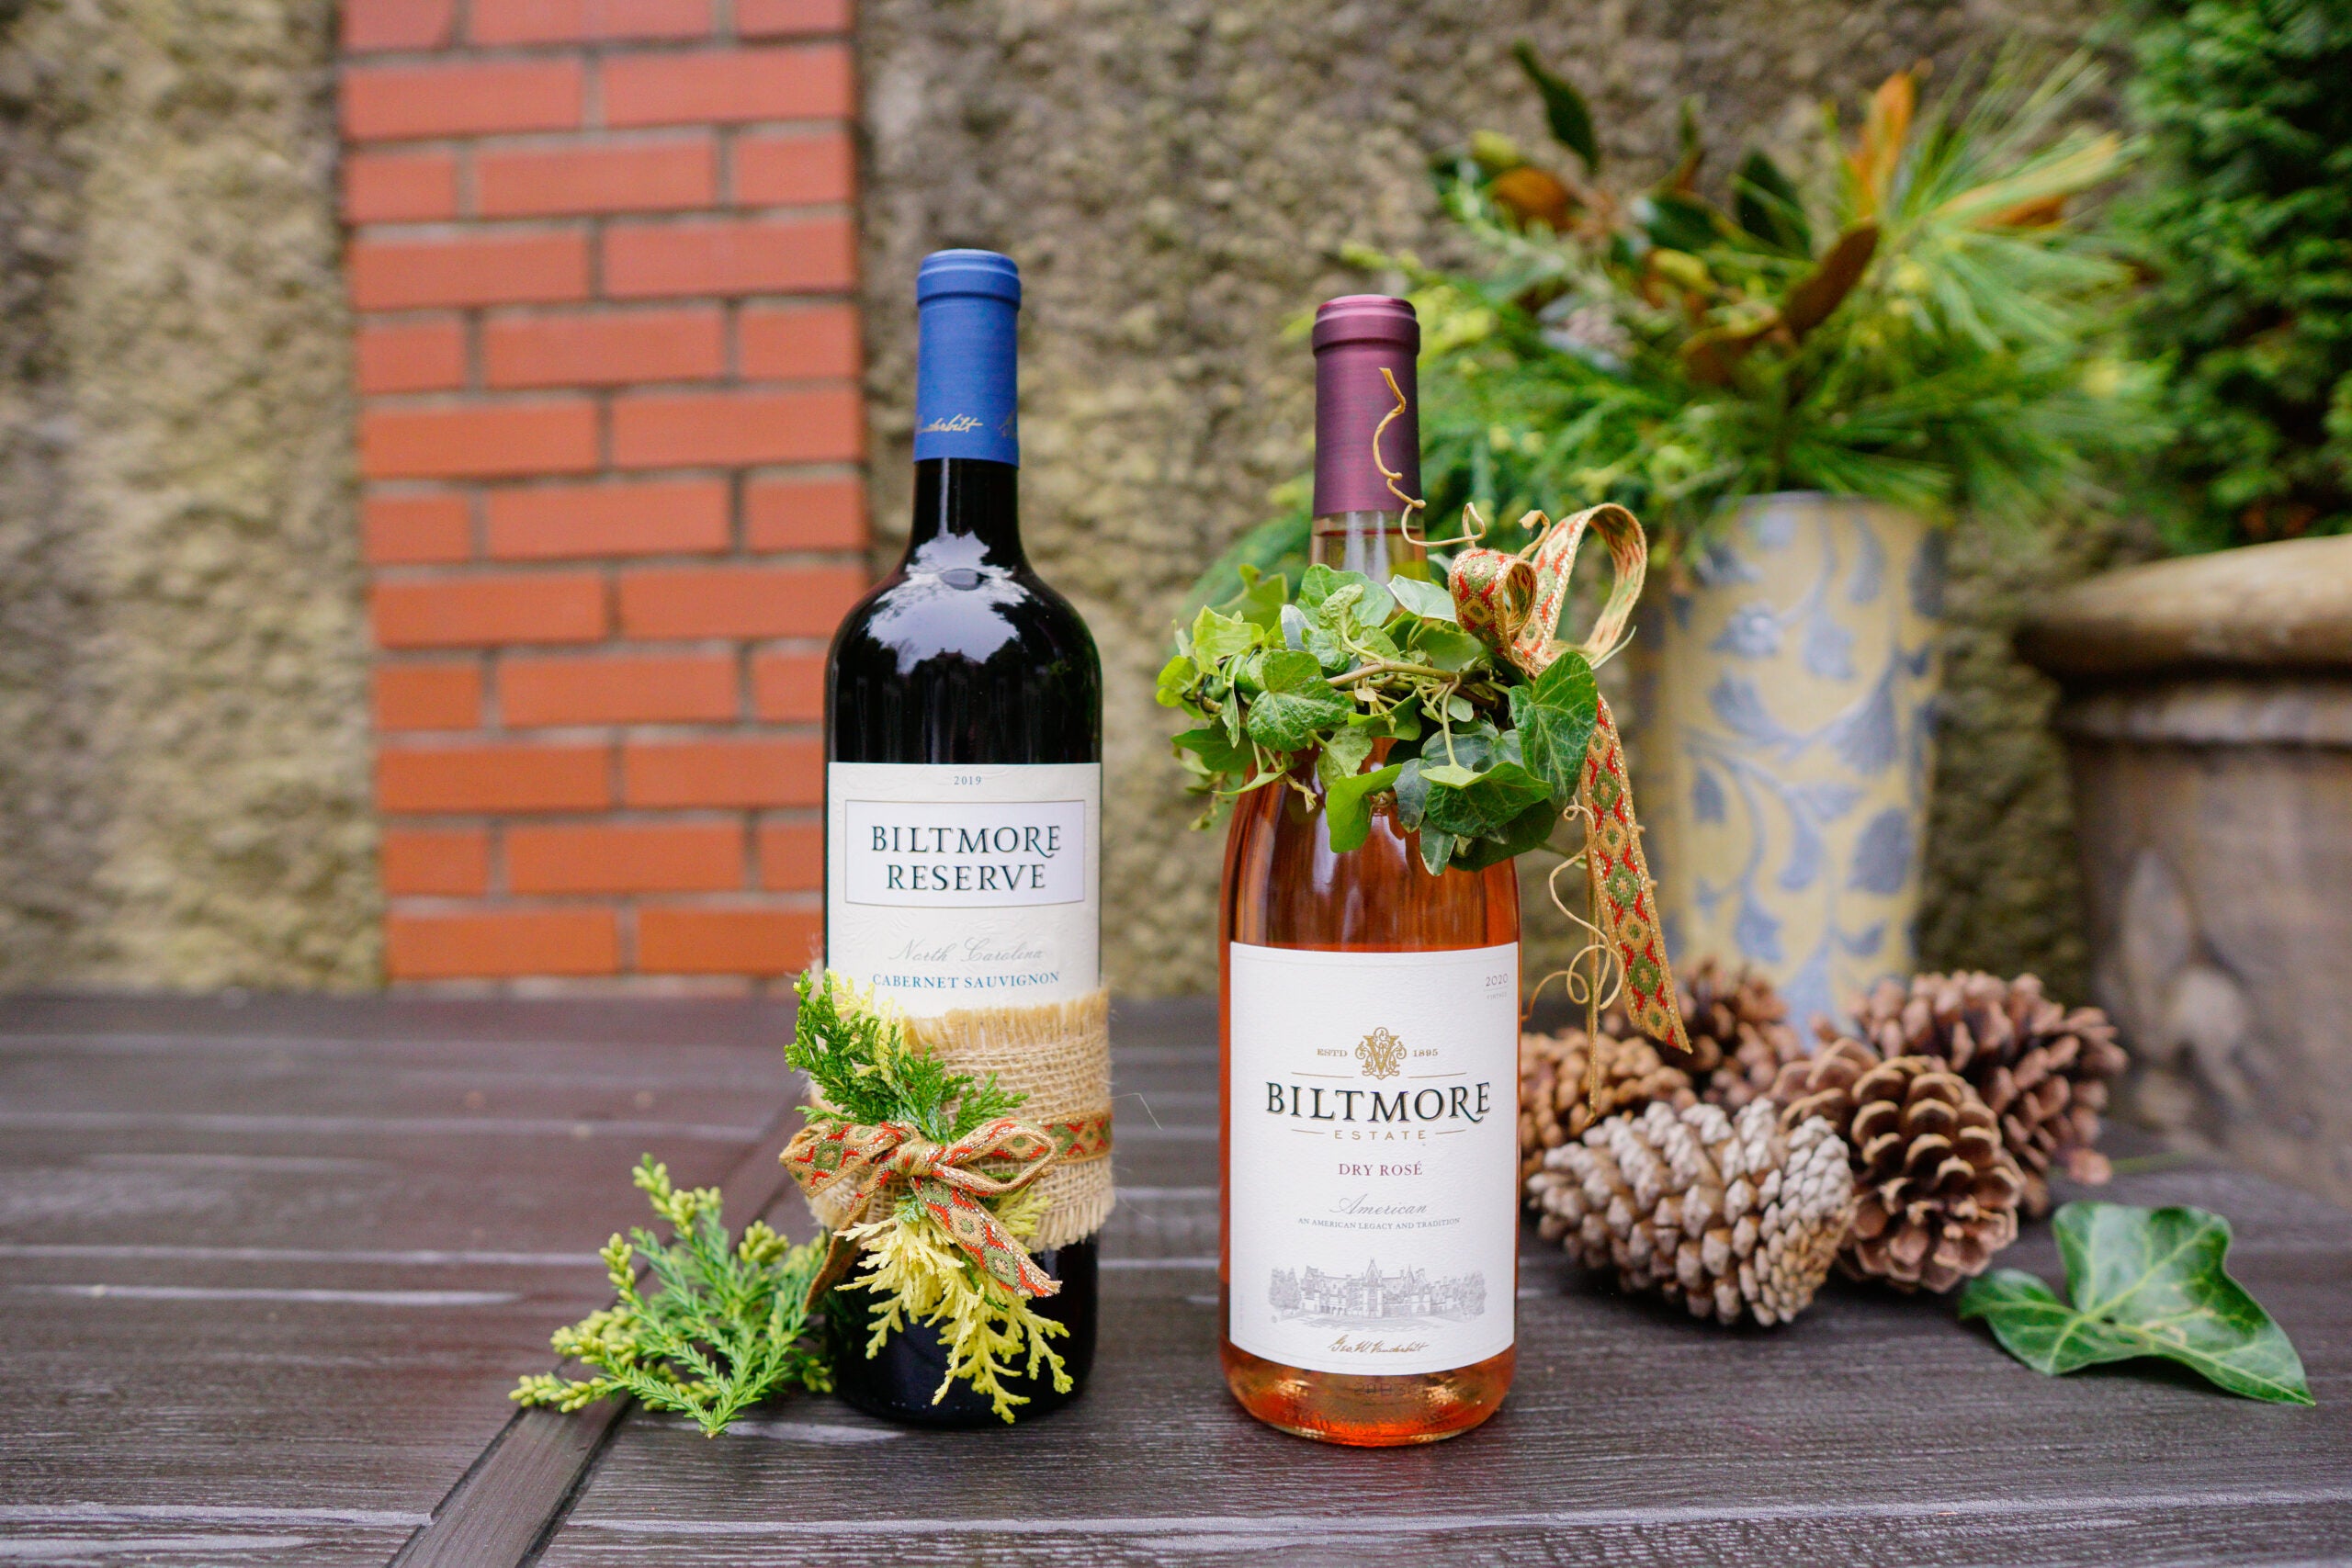 Simple evergreen clippings and leftover ribbon pieces can help elevate your wine gift-giving this holiday season.